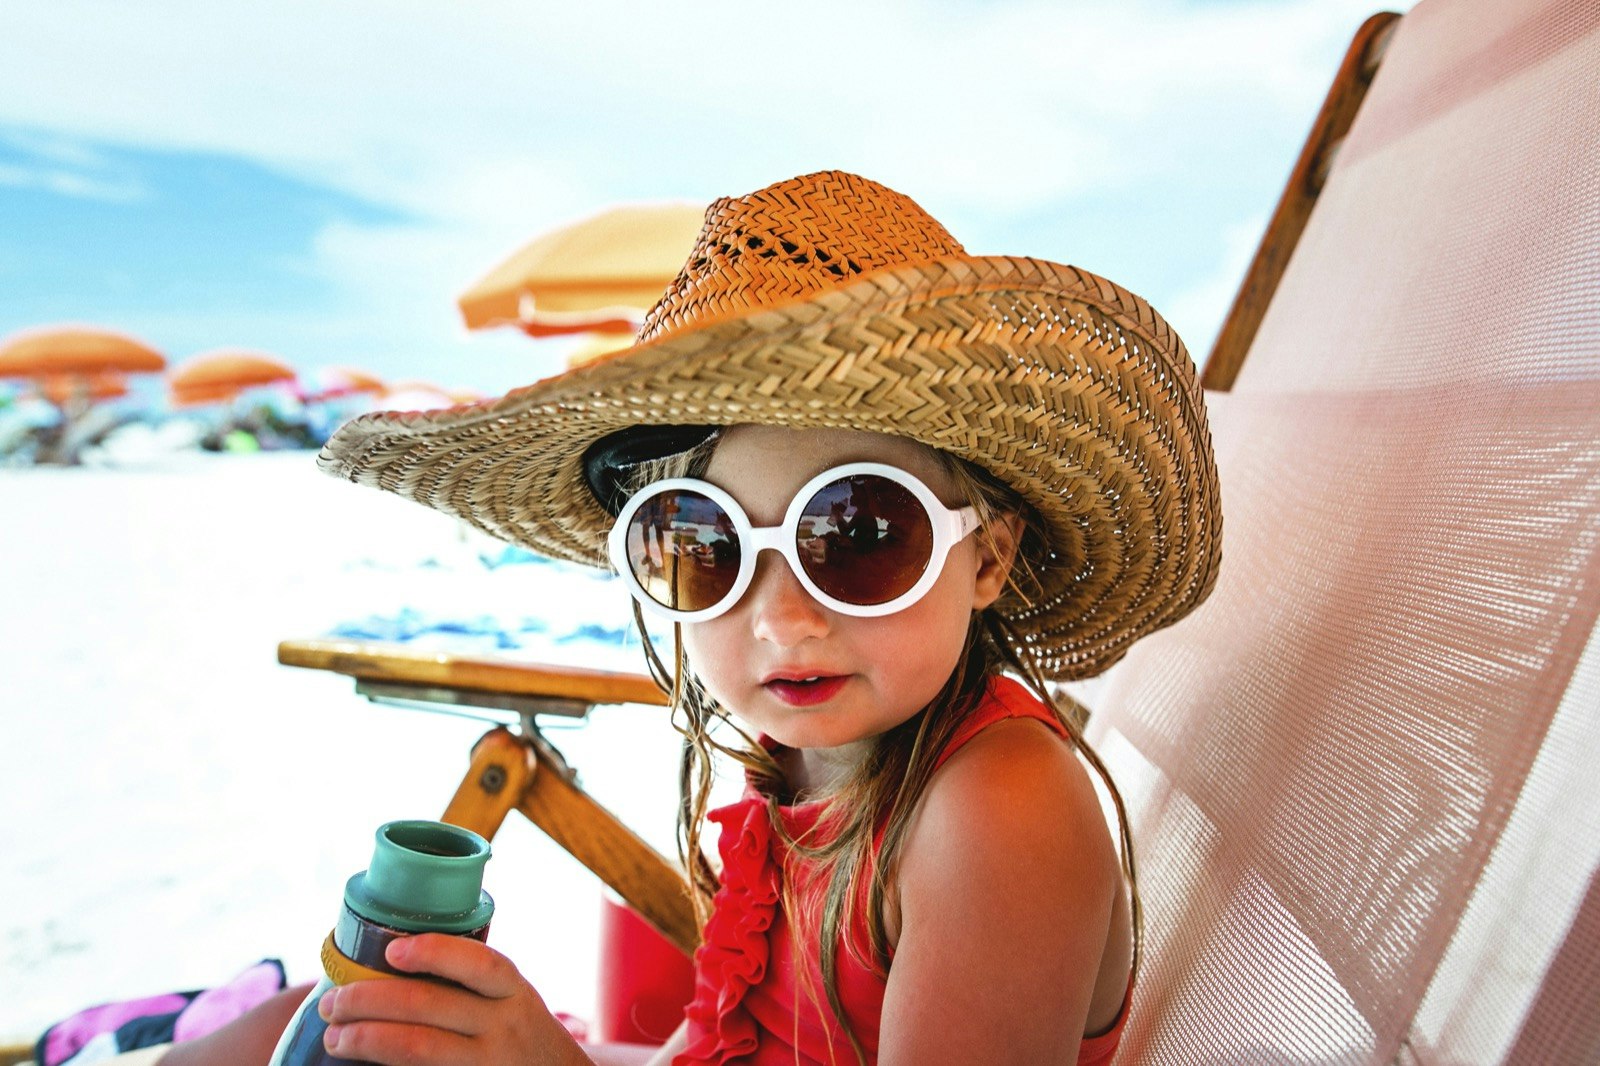 Young girl with large sunglasses sits in a lounge chair on the beach in Clearwater, Florida